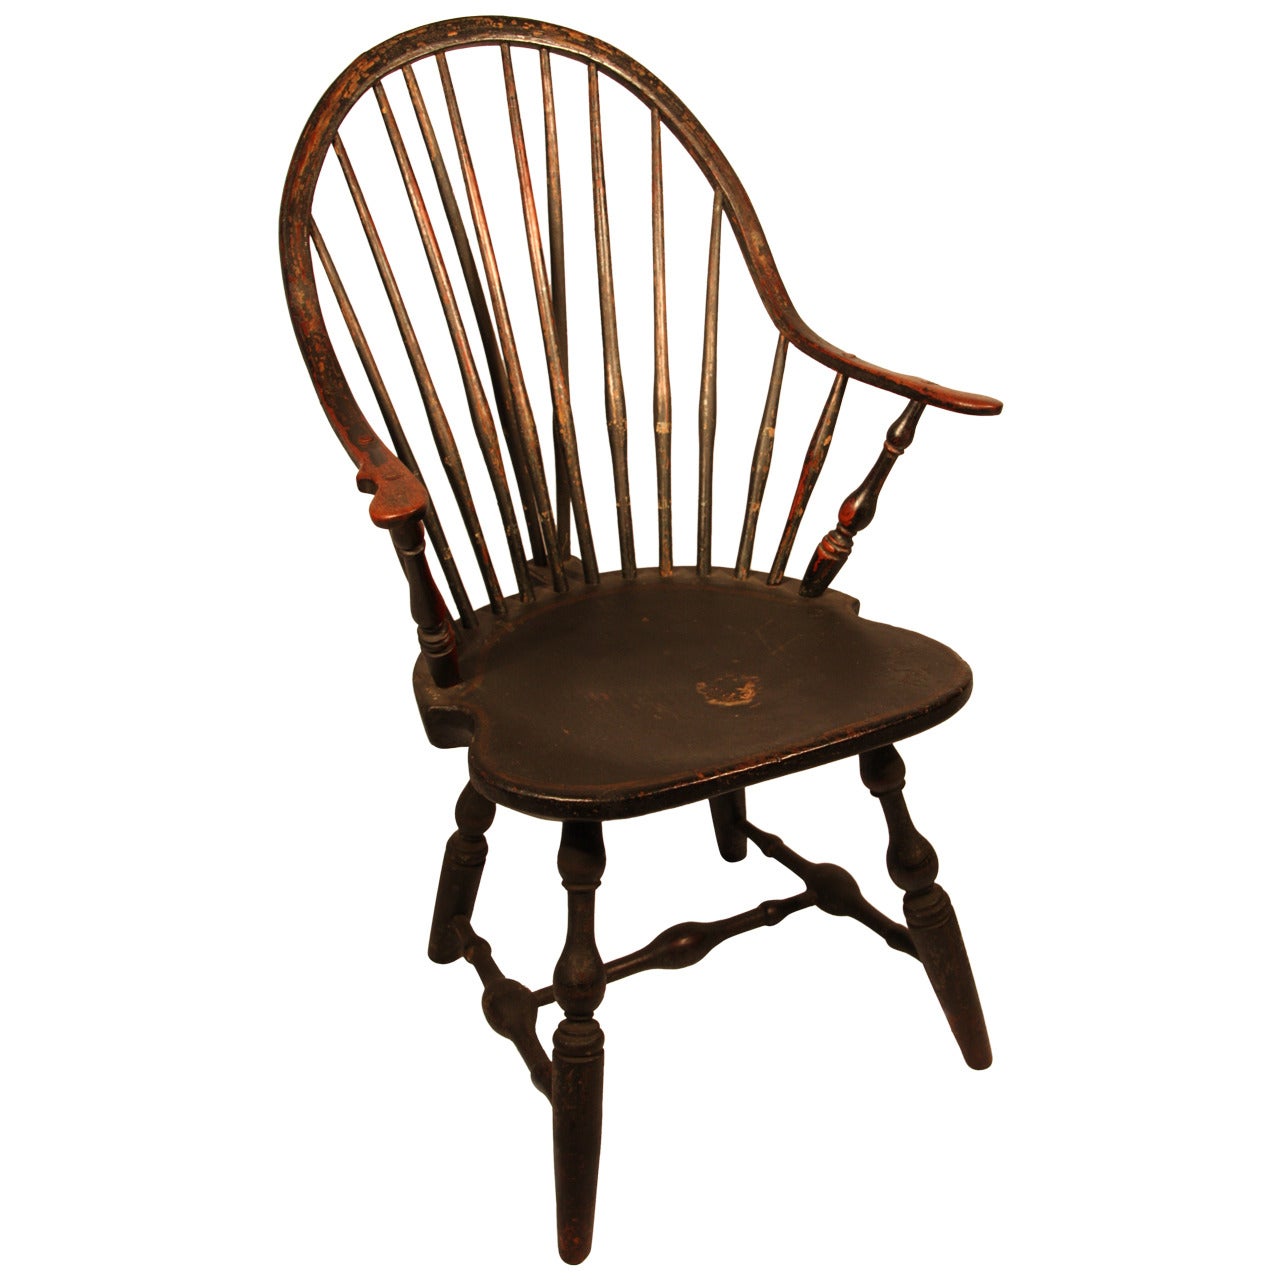 18th Century Connecticut Continuous Windsor Armchair, Signed E.B. Tracy